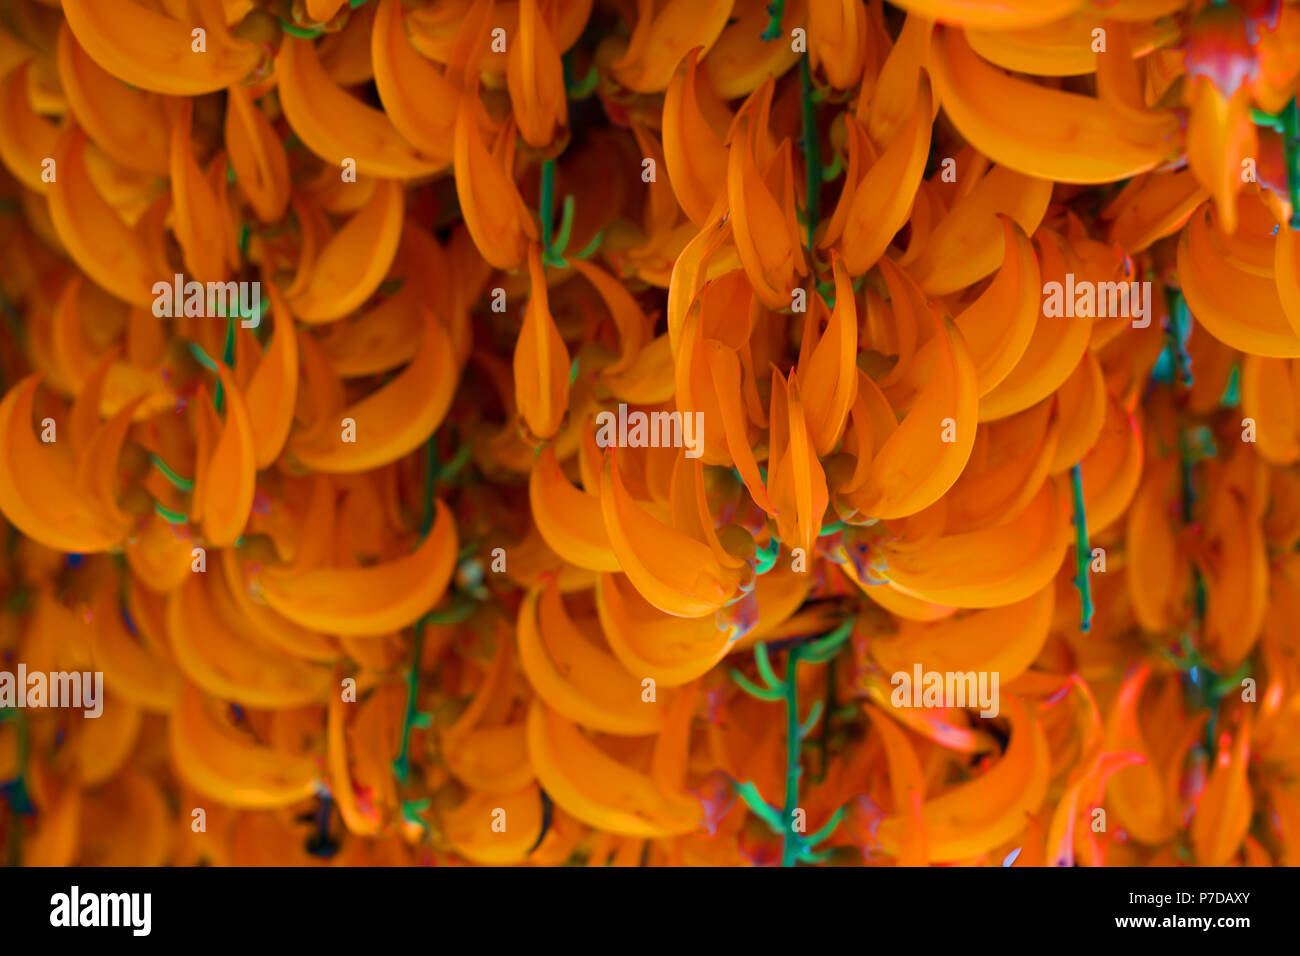 Orange flower of name Red Jade Vine or New Guinea Creeper or flowers. (Scientific Name:Mucuna Bennettii) Stock Photo